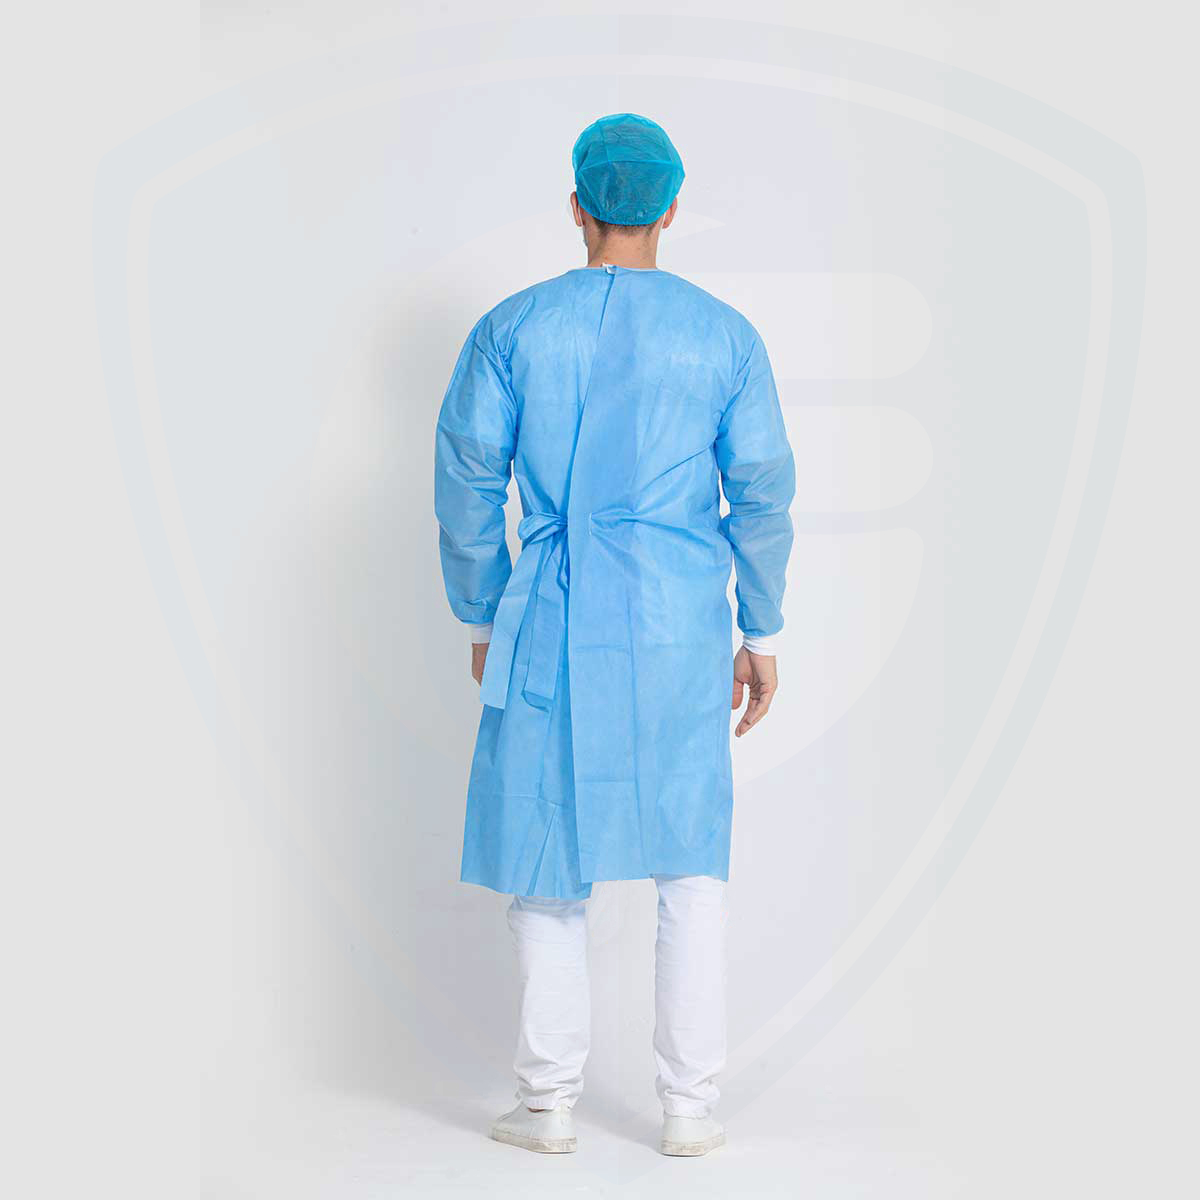 EN13795 Surgical Disposable Gowns for Protection Against Infectious Agents